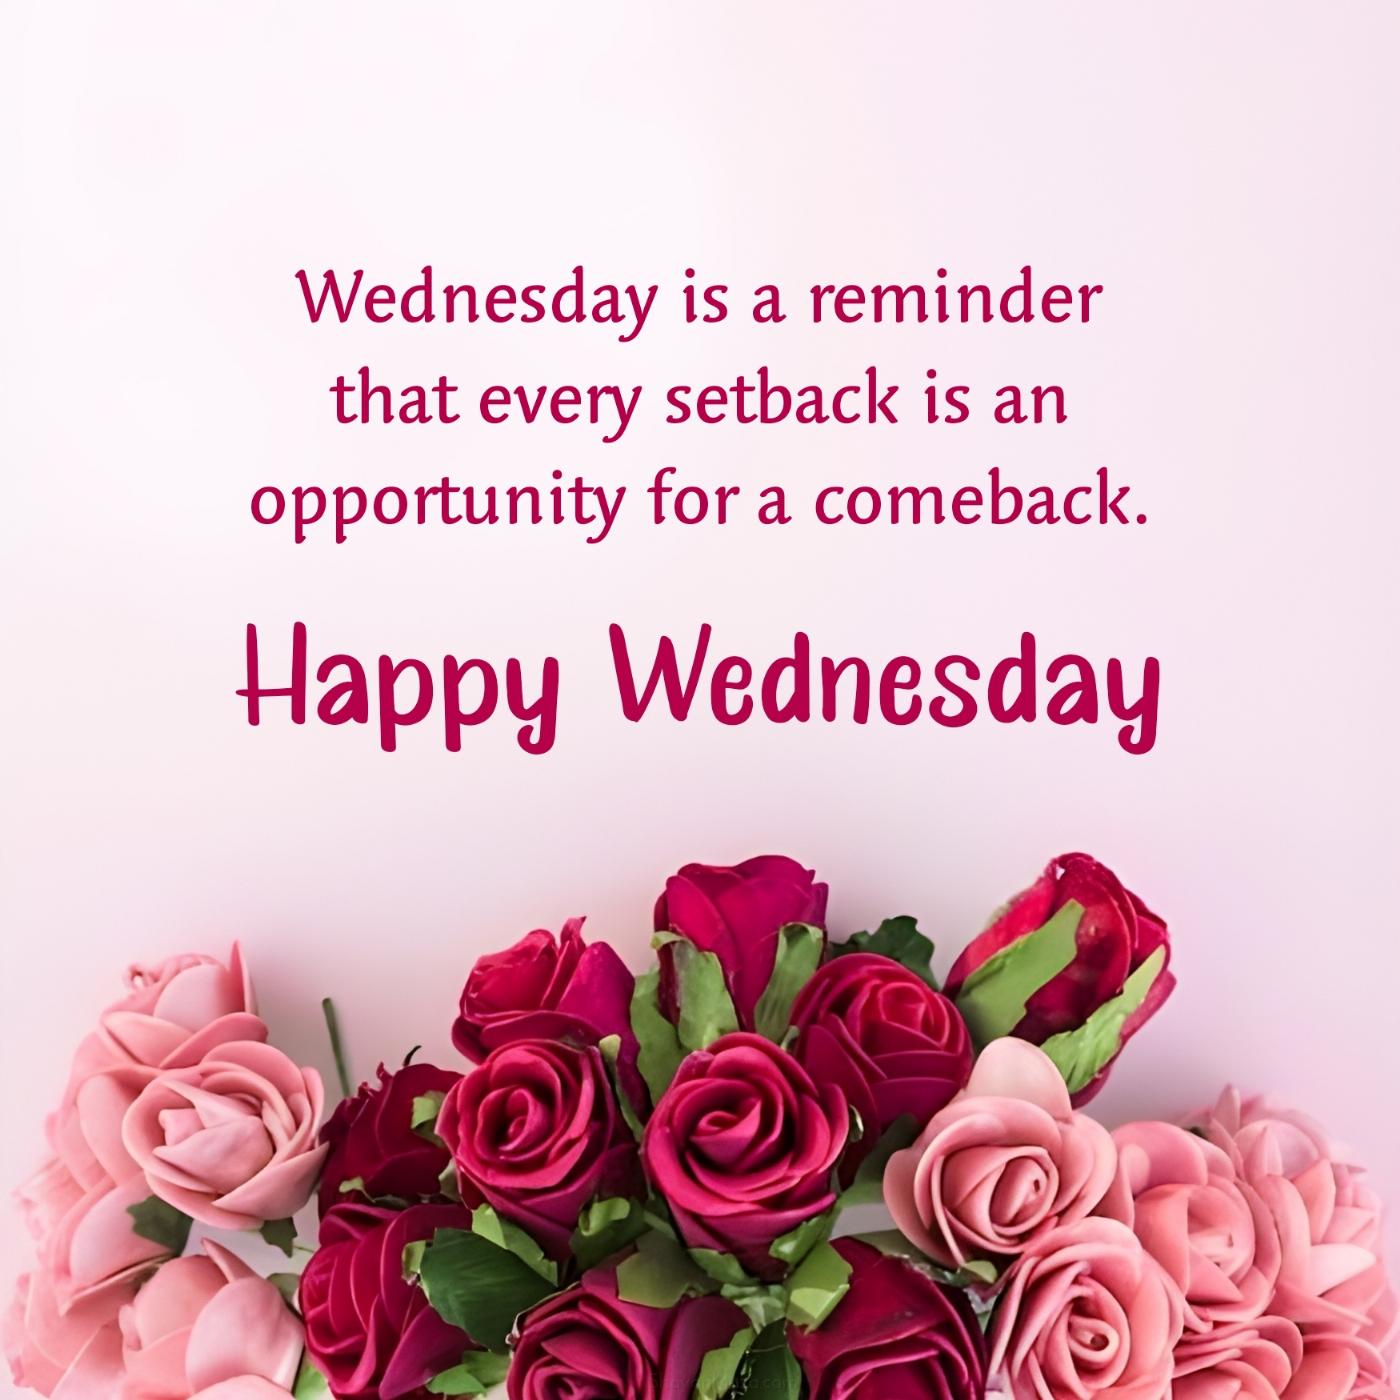 Wednesday is a reminder that every setback is an opportunity for a comeback